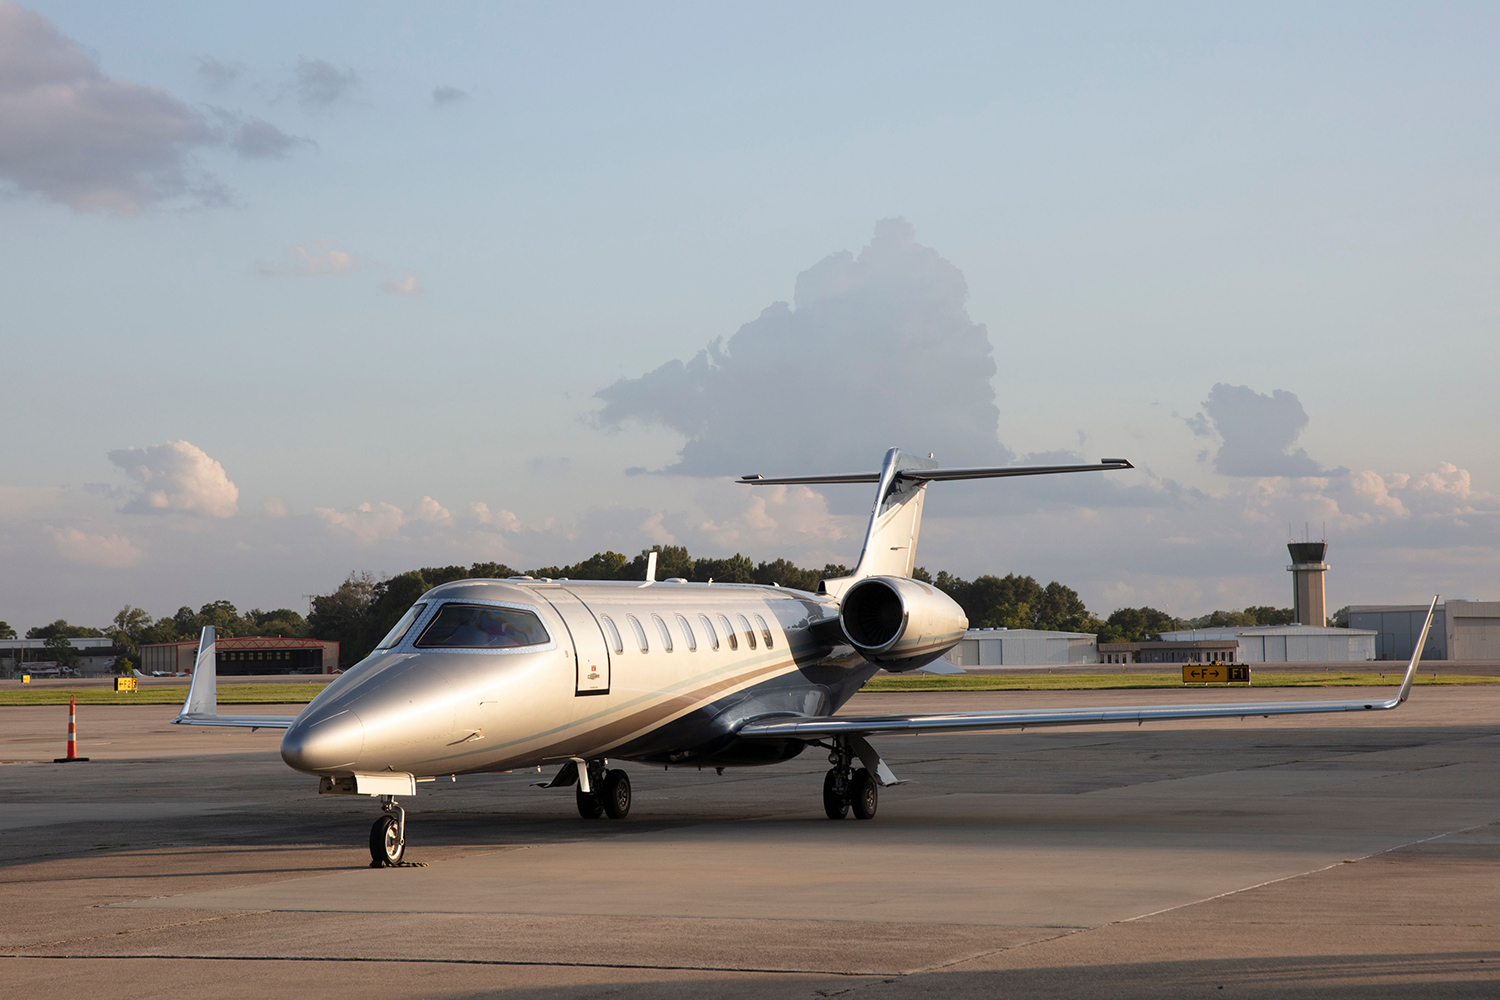 Lear 45 popular destinations and sample prices for round trip flights from BTR Air Charter 